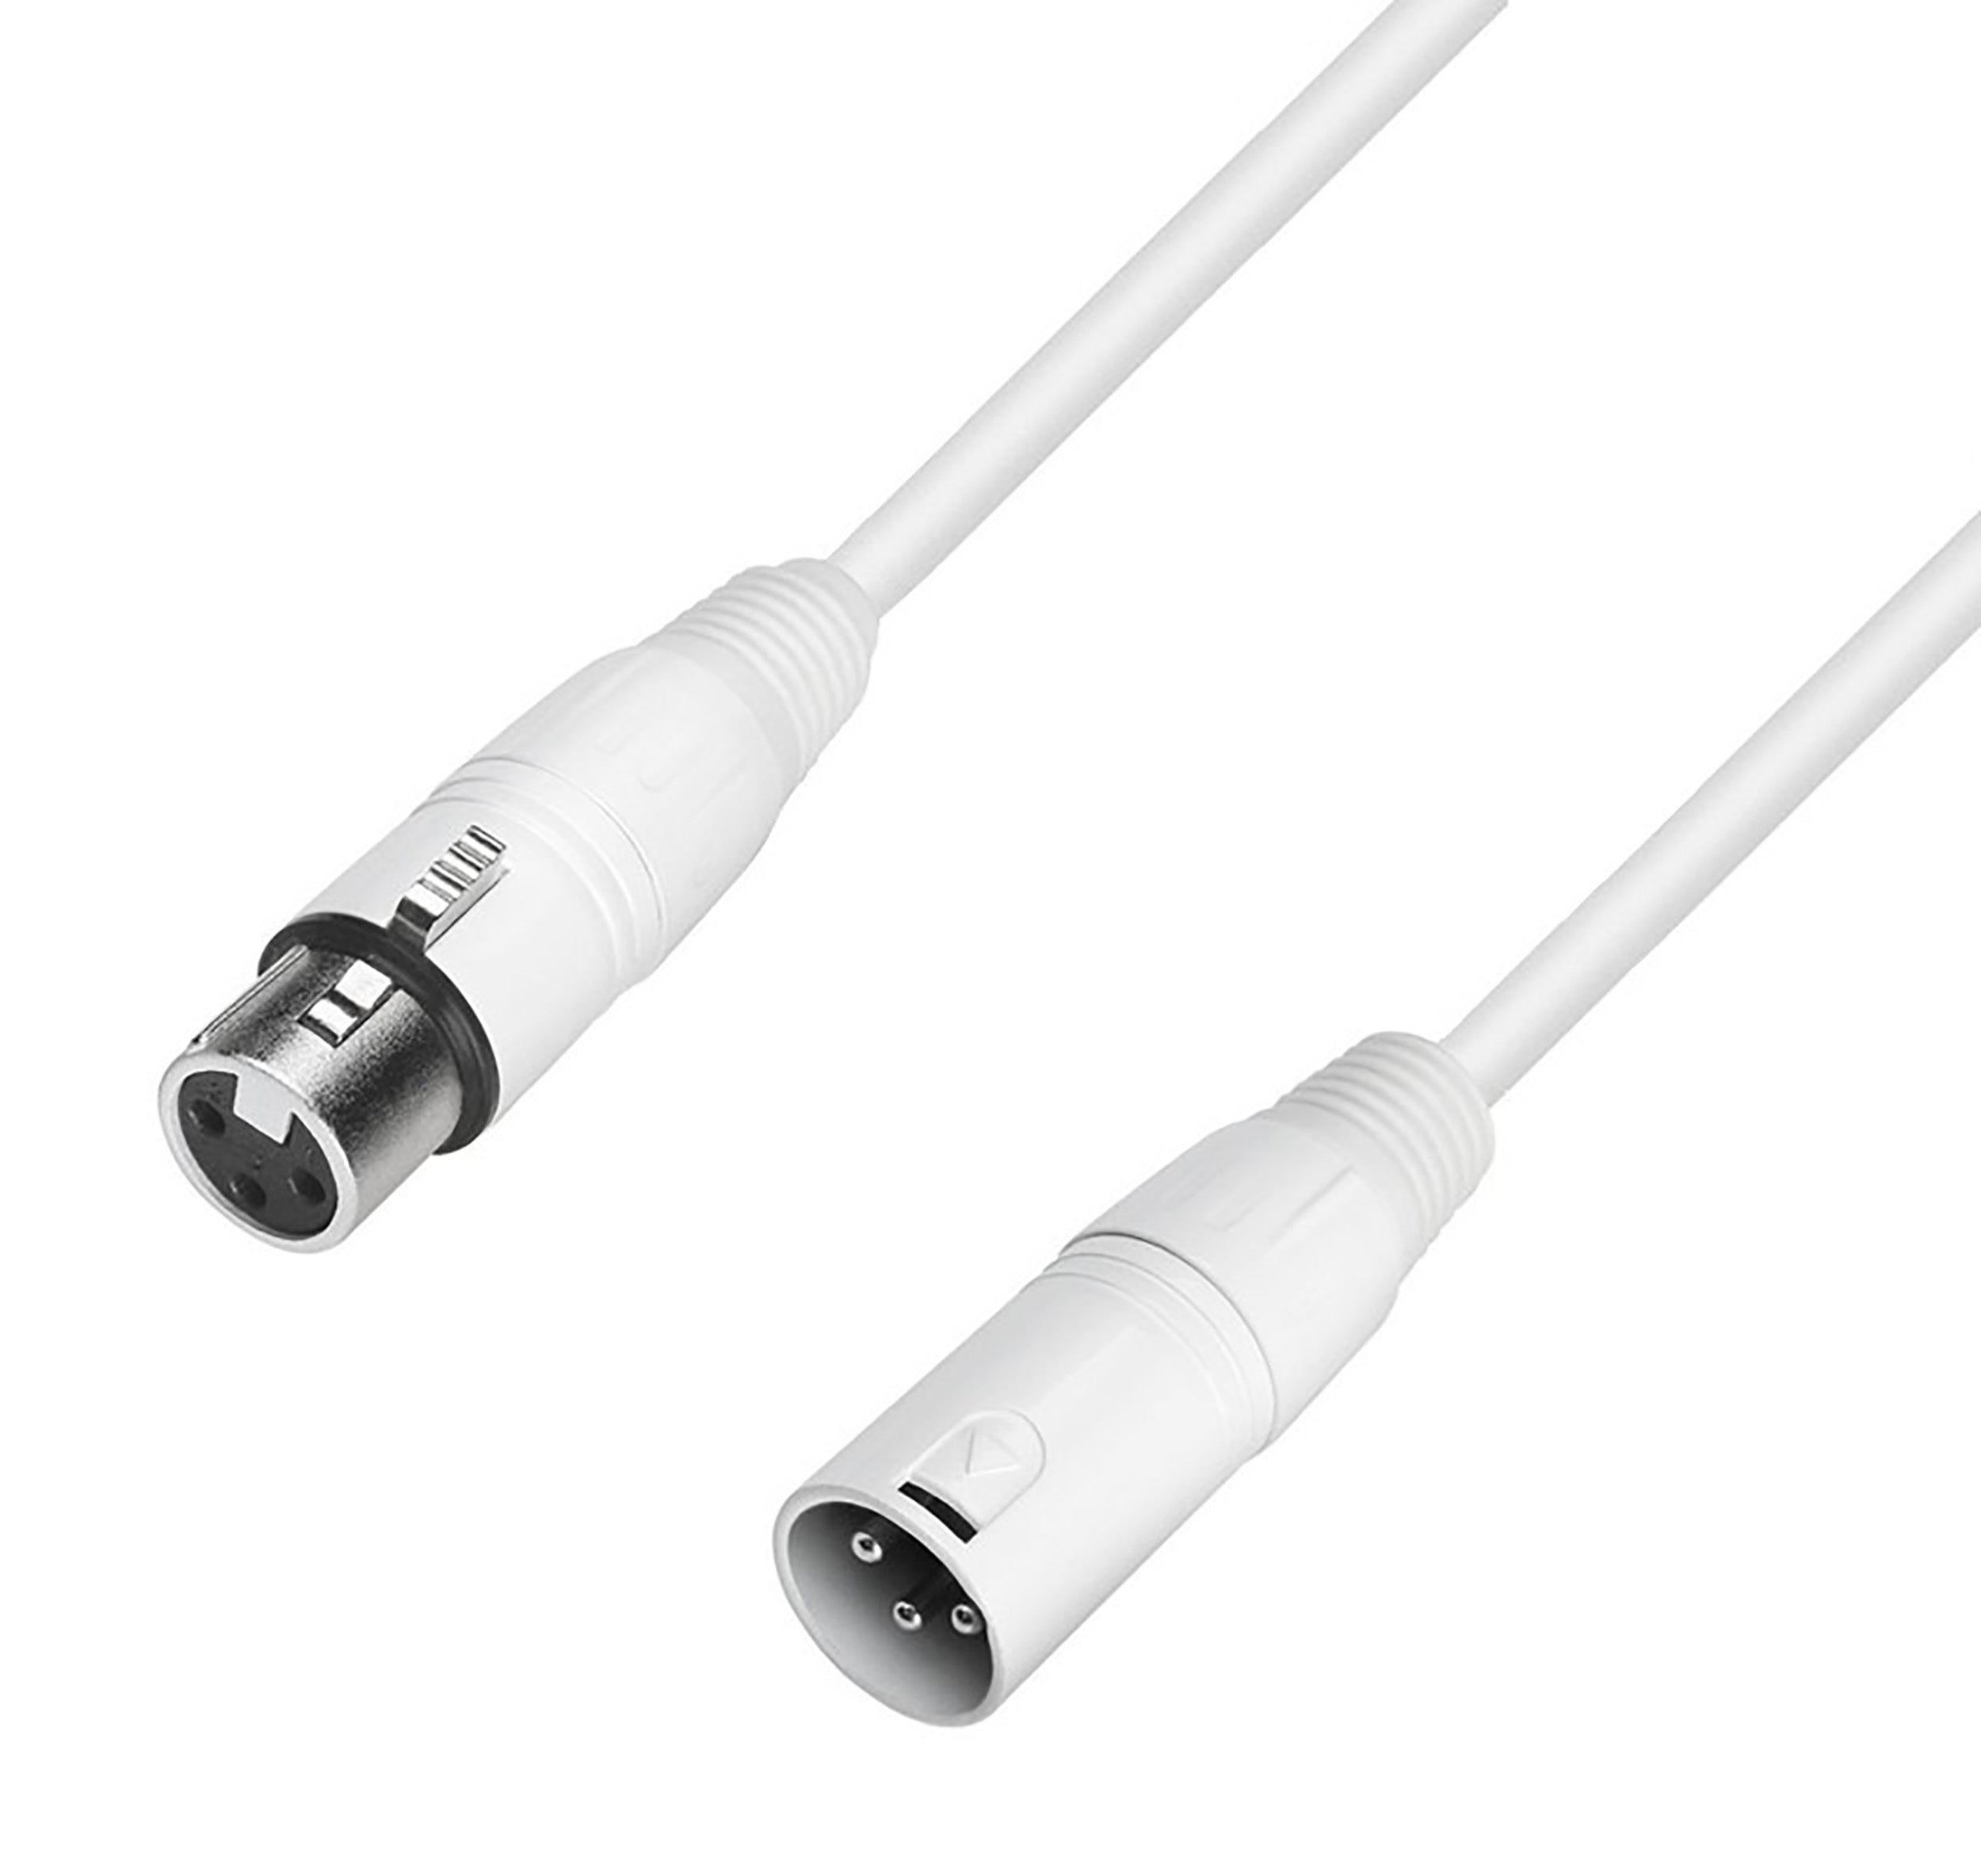 Adam Hall Cables 4 STAR MMF 1500 SNOW, Microphone Cable XLR Female to XLR Male - 15 M by Adam Hall